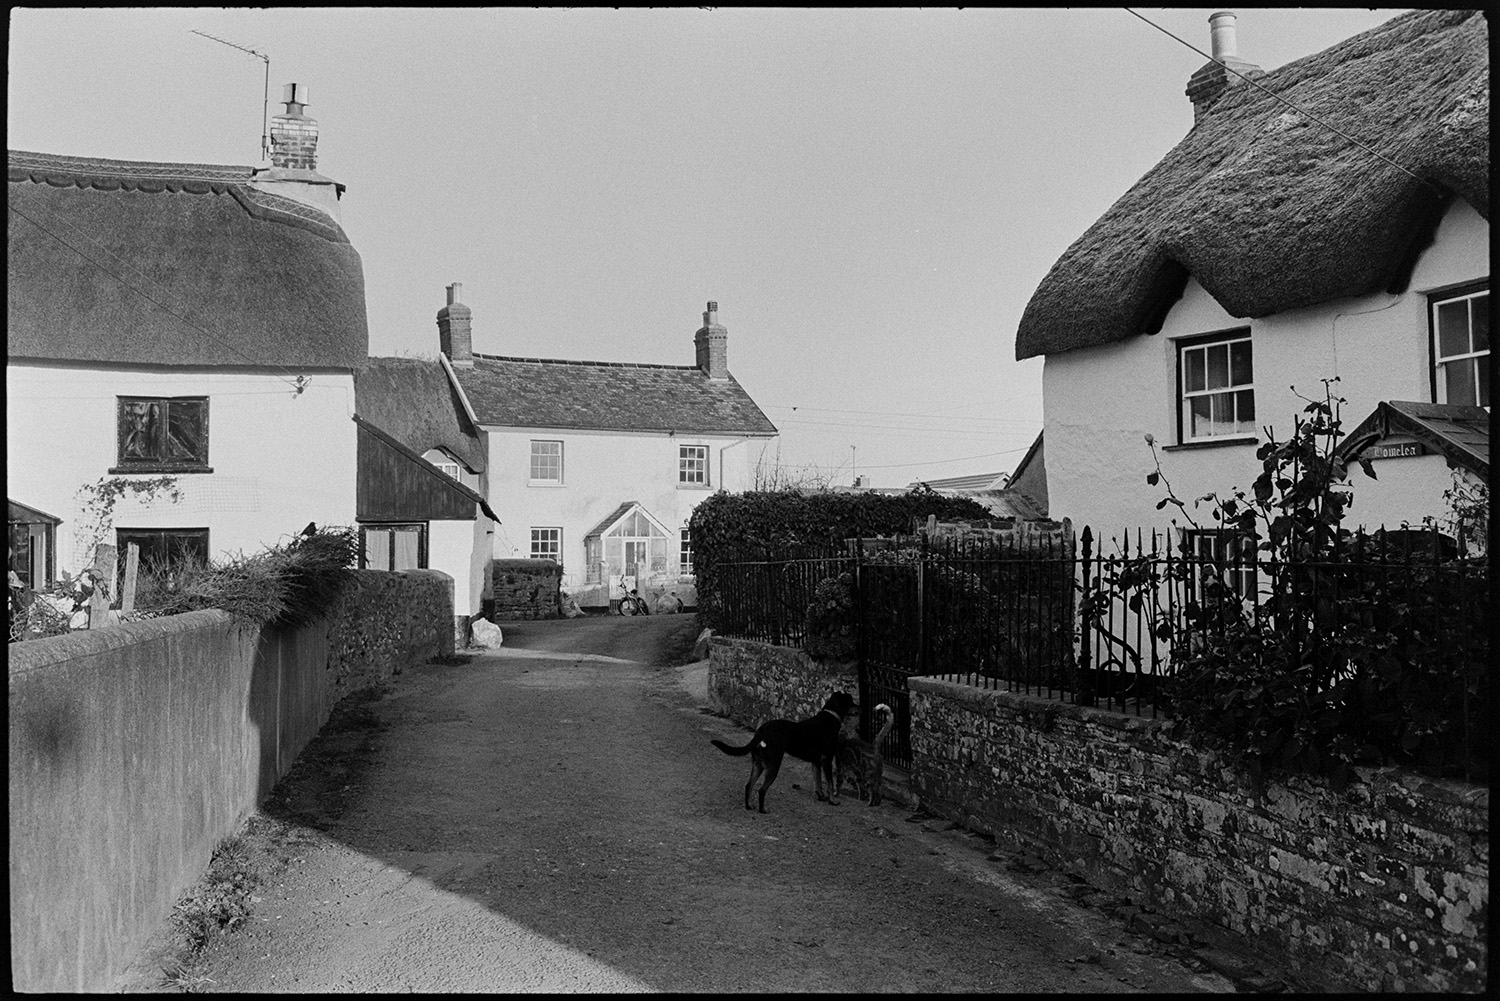 Street scene, lens test?
[Street scene with a dog and cat outside a thatched cottage at Dolton.]